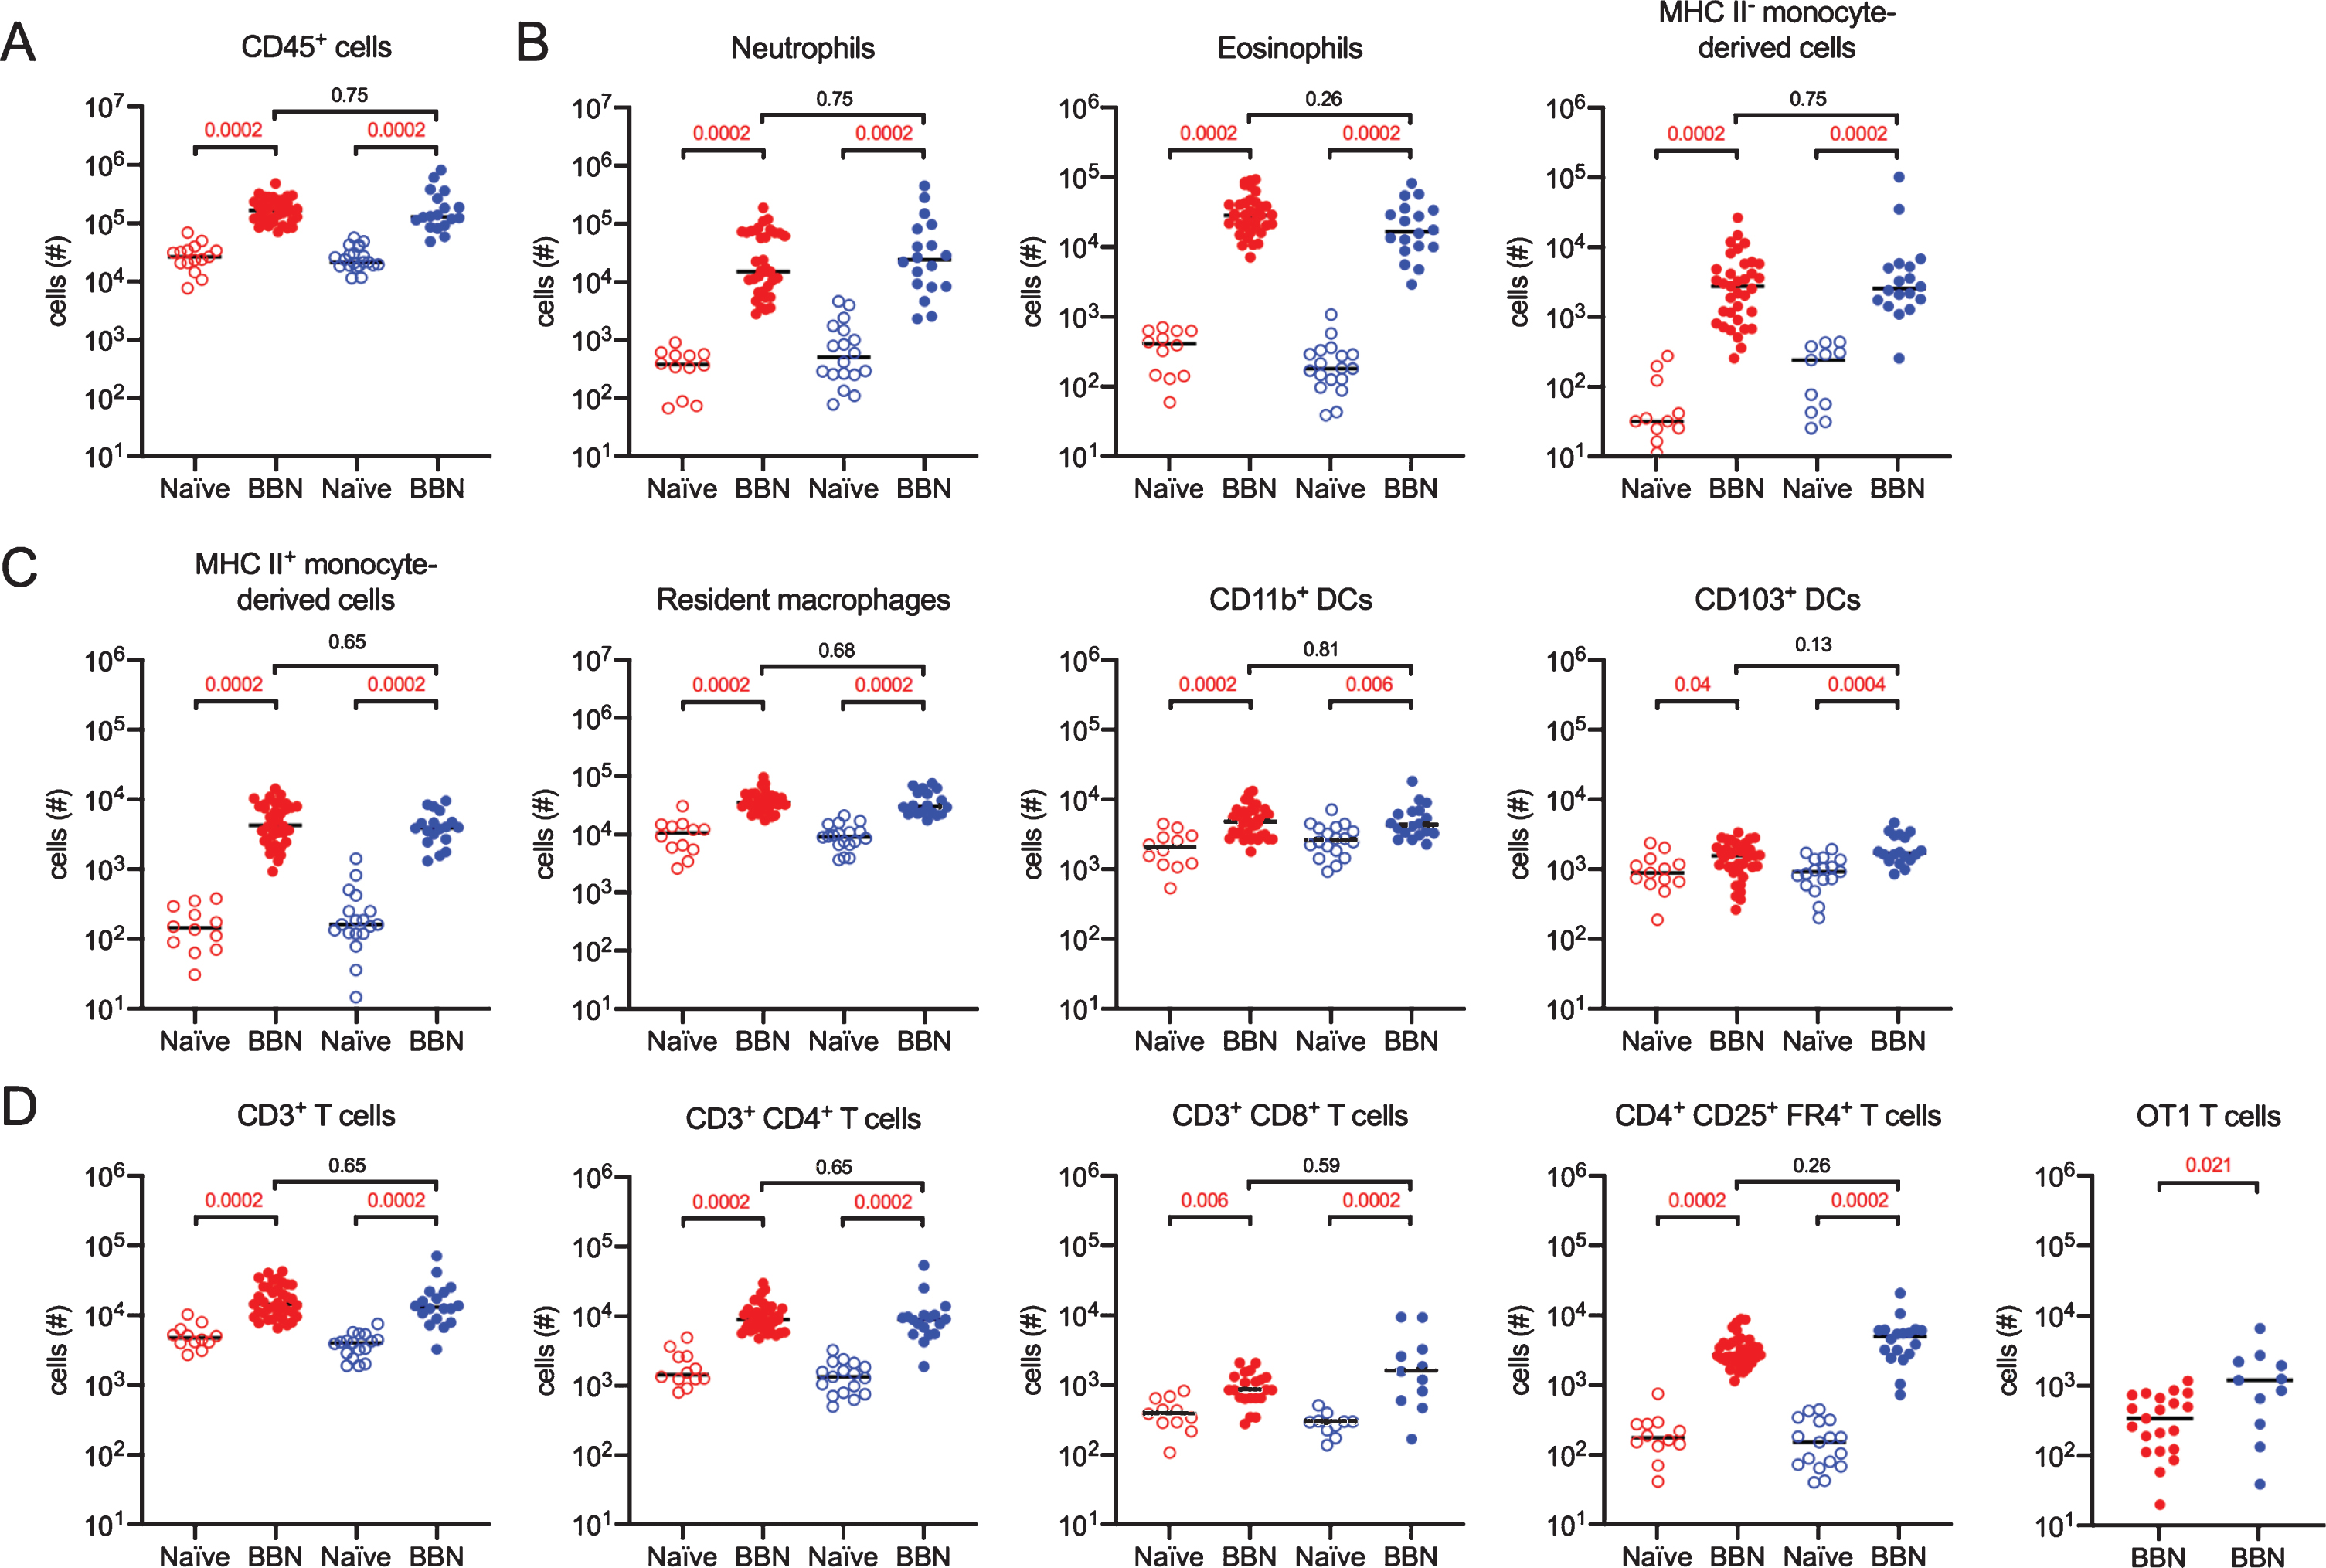 More CD8+ tumor-specific T cells infiltrate male bladders than female bladders. Mice were treated as shown in Fig. 5A. Graphs depict the total number of specified immune cell populations in naïve or tumor-bearing female (red dots) and male (blue dots) URO-OVA mice. Graphs are pooled from 10 experiments, n = 1–7 mice per experiment. Each dot represents 1 mouse, lines are medians. Significance was determined using the nonparametric Kruskal-Wallis test to compare naïve to BBN-treated mice for each immune cell population and to compare female to male BBN-treated mice. p-values were corrected for multiple testing using the FDR method. All calculated/corrected p-values are shown and those meeting the criteria for statistical significance (p < 0.05) are depicted in red.